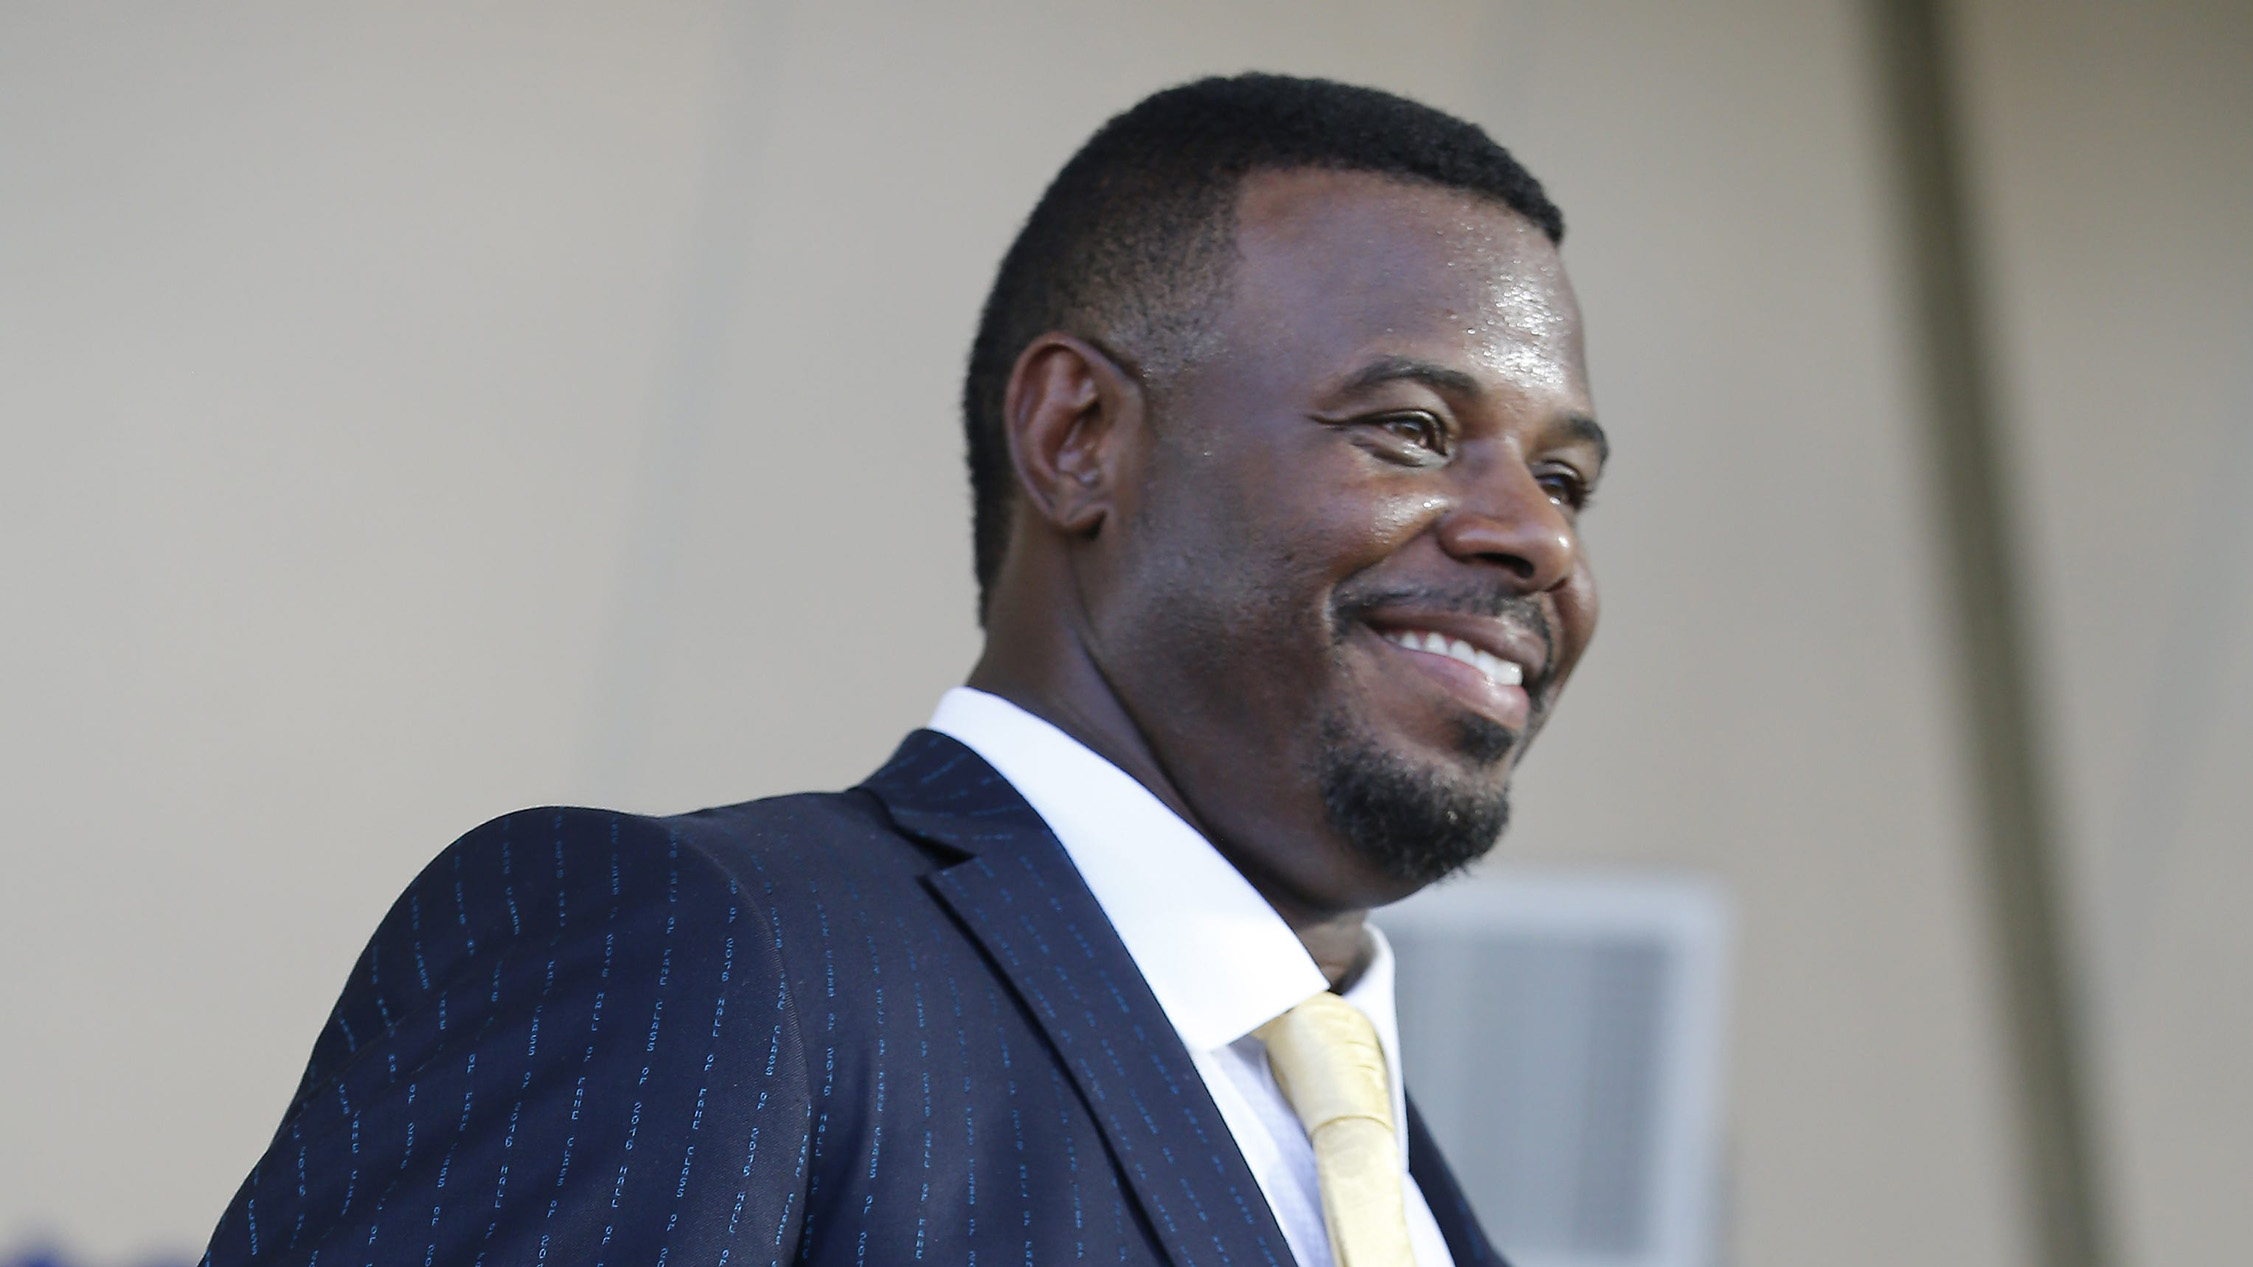 Ken Griffey Jr. is 3rd highest-paid player on Reds payroll in 2023 (no  really)